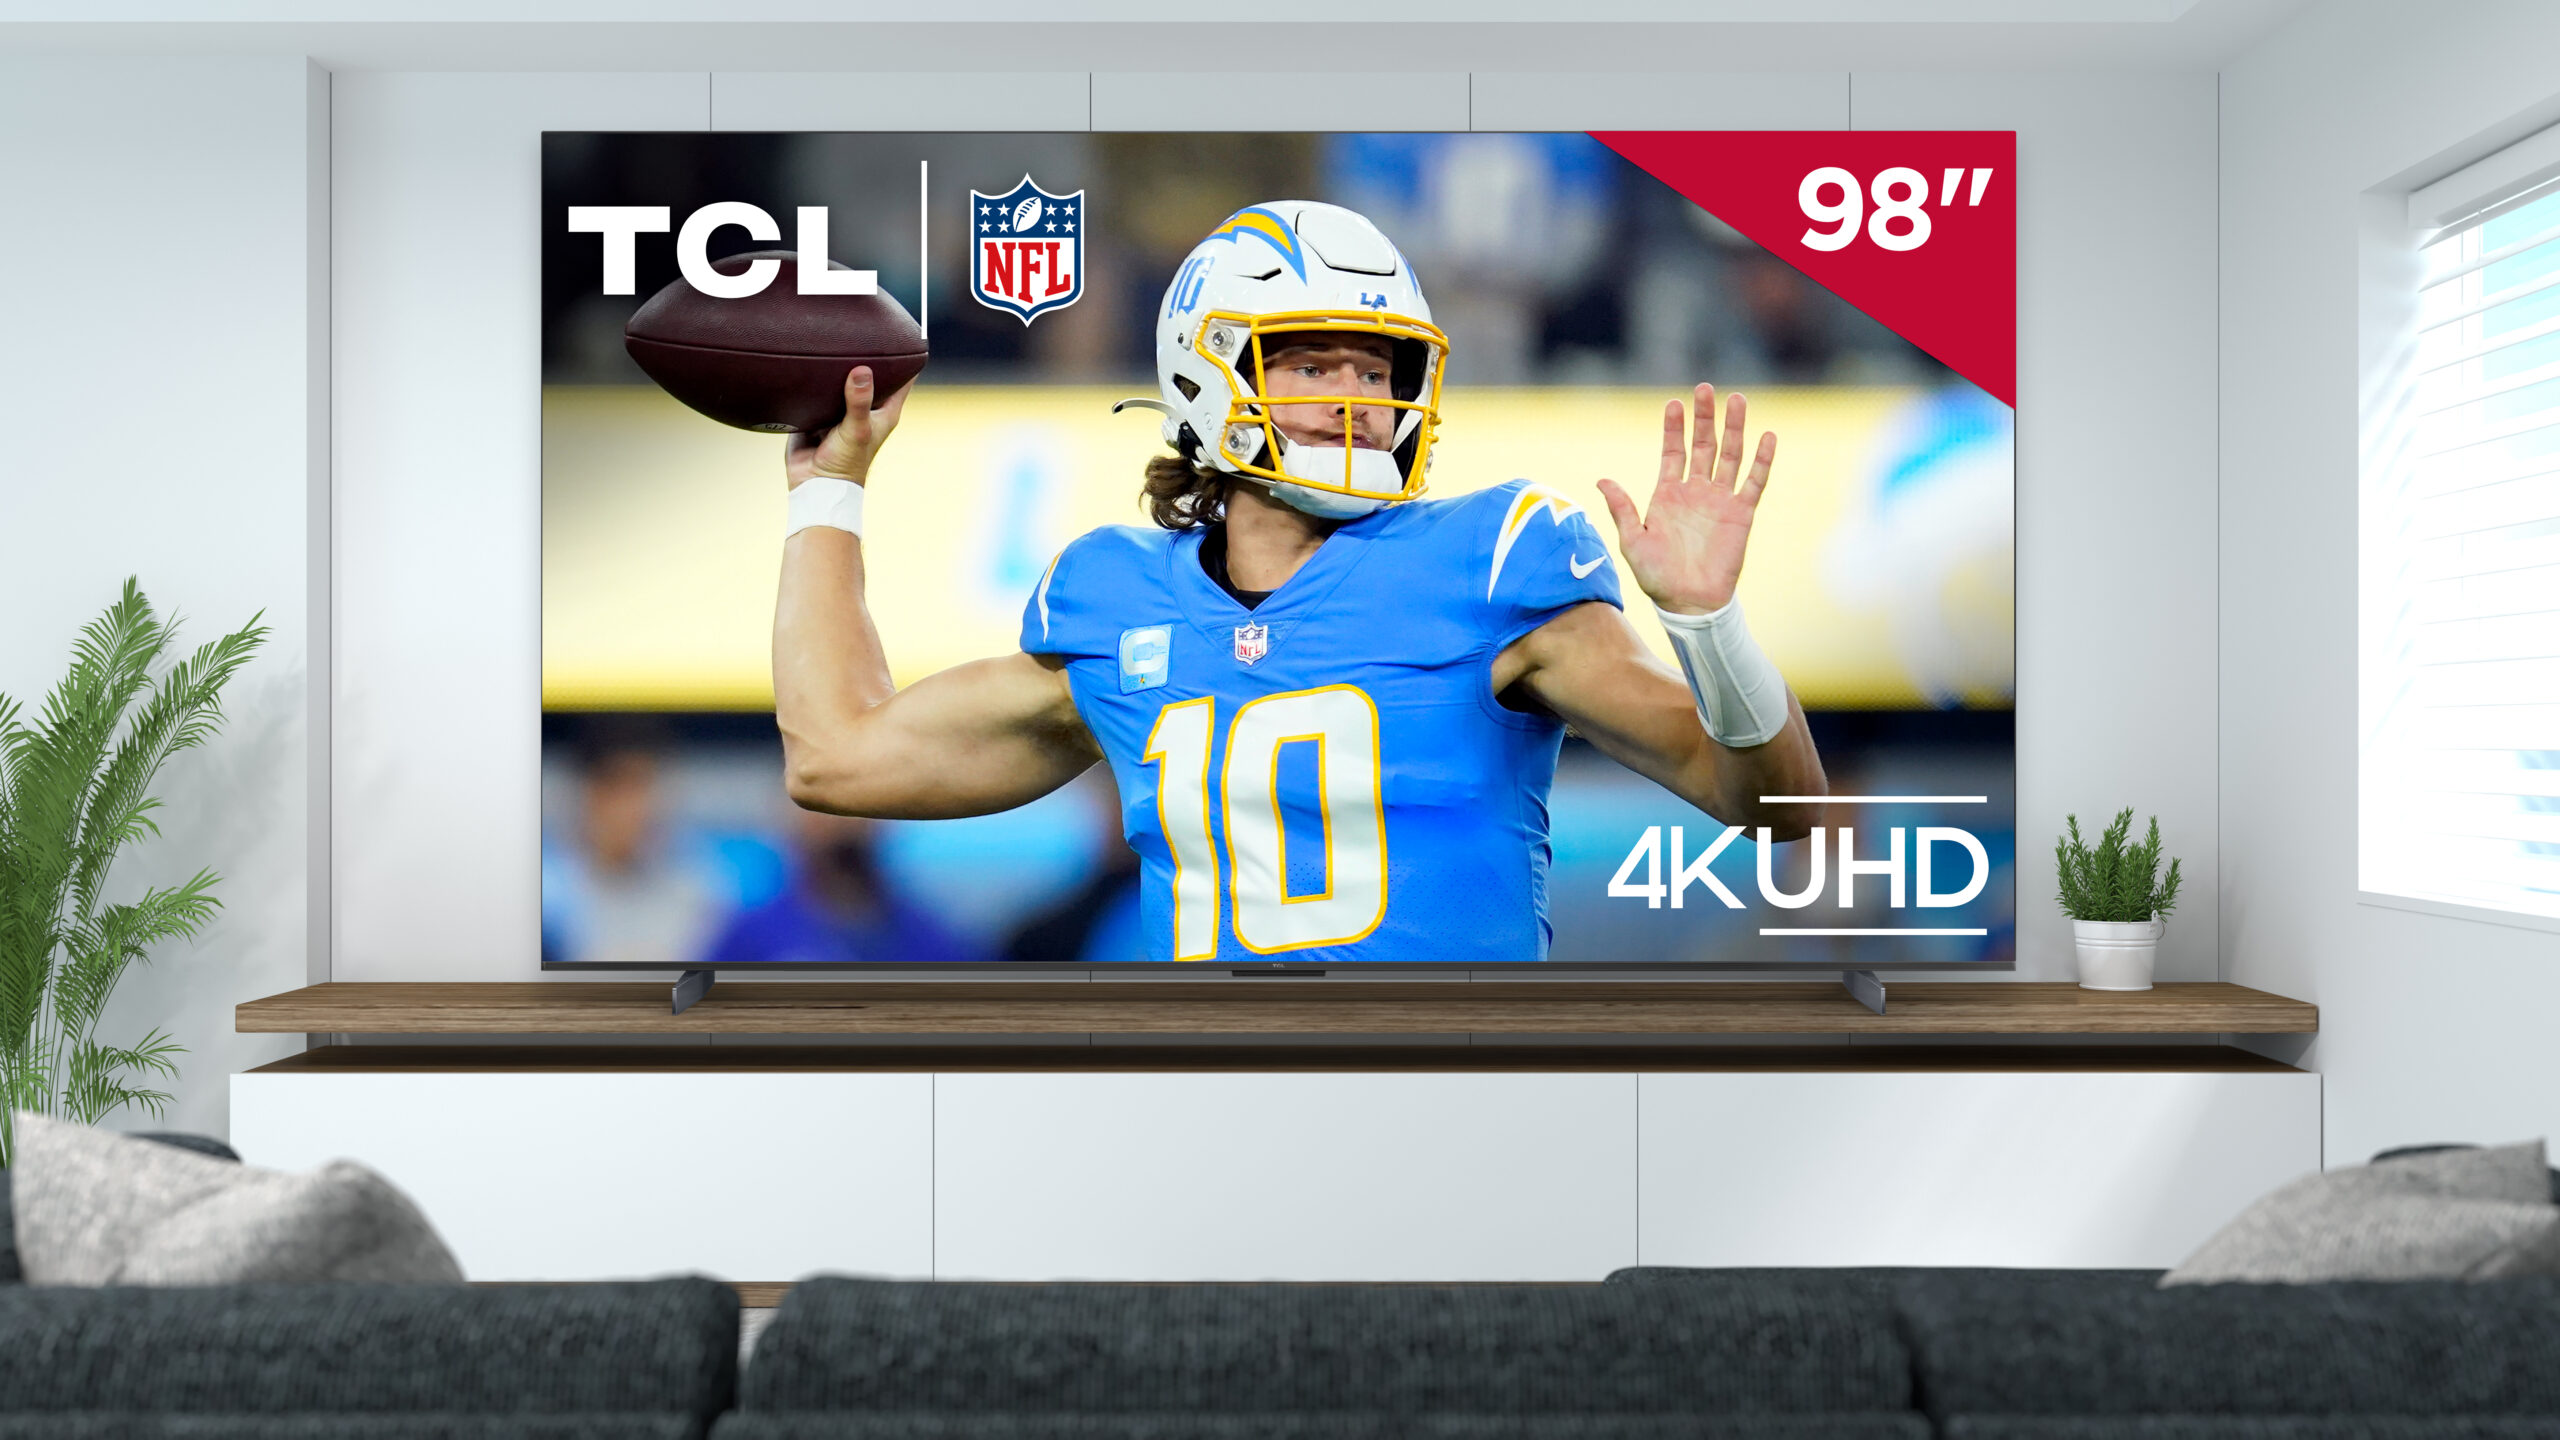 TCL’s New 98-Inch S5 TV Is Available With NFL Sunday Ticket Deal